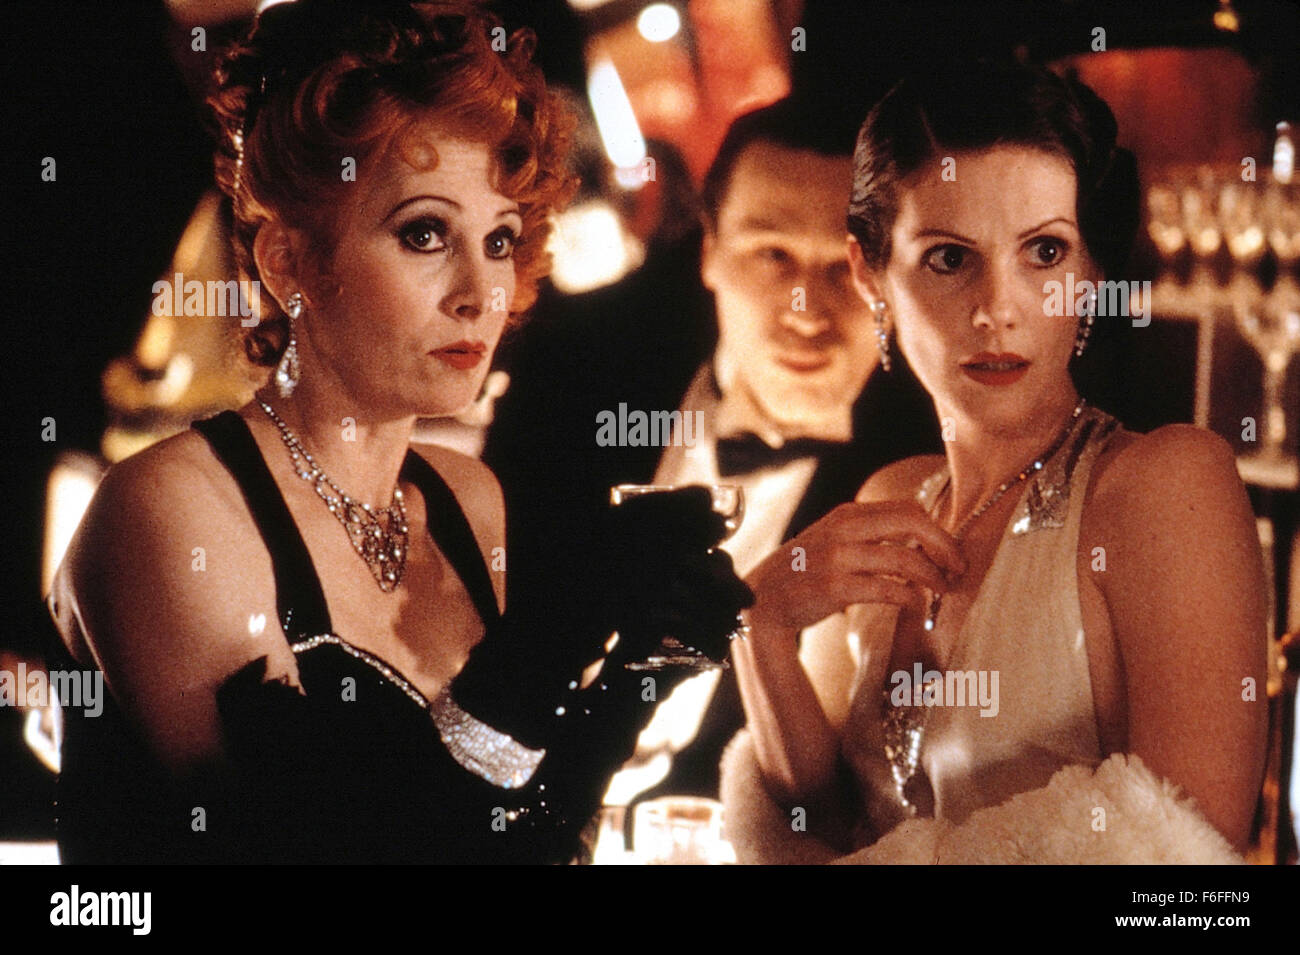 Release Date: 1989. MOVIE TITLE: Bloodhounds of Broadway. Pictured: Actresses ANITA MORRIS as Miss Missouri Martin and JULIE HAGERTY as Harriet MacKyle. Stock Photo